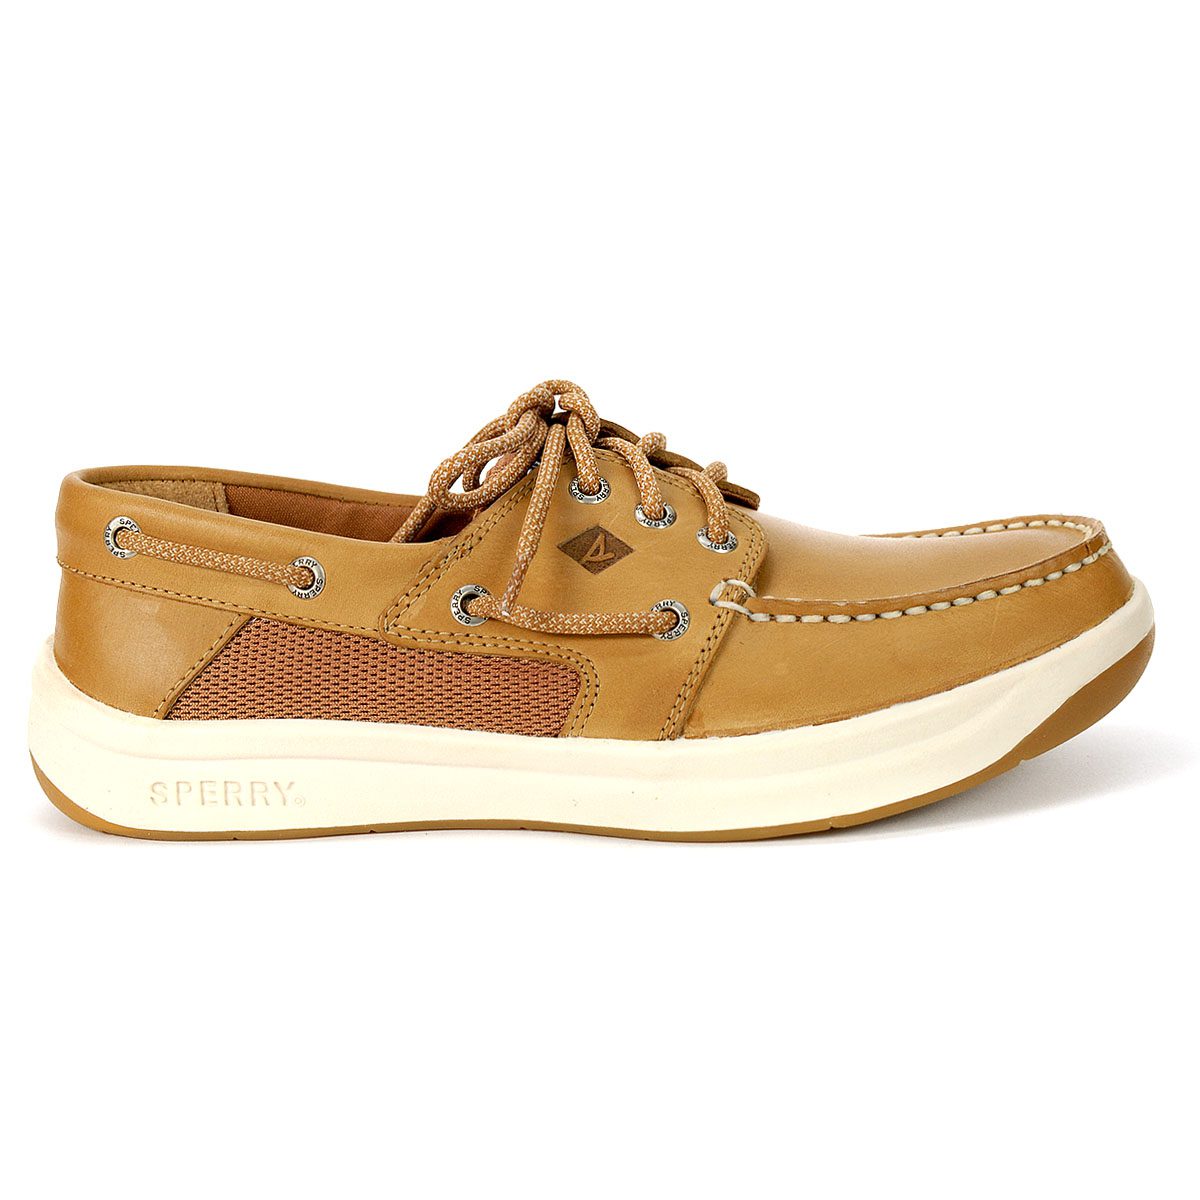 sperry top sider 61317